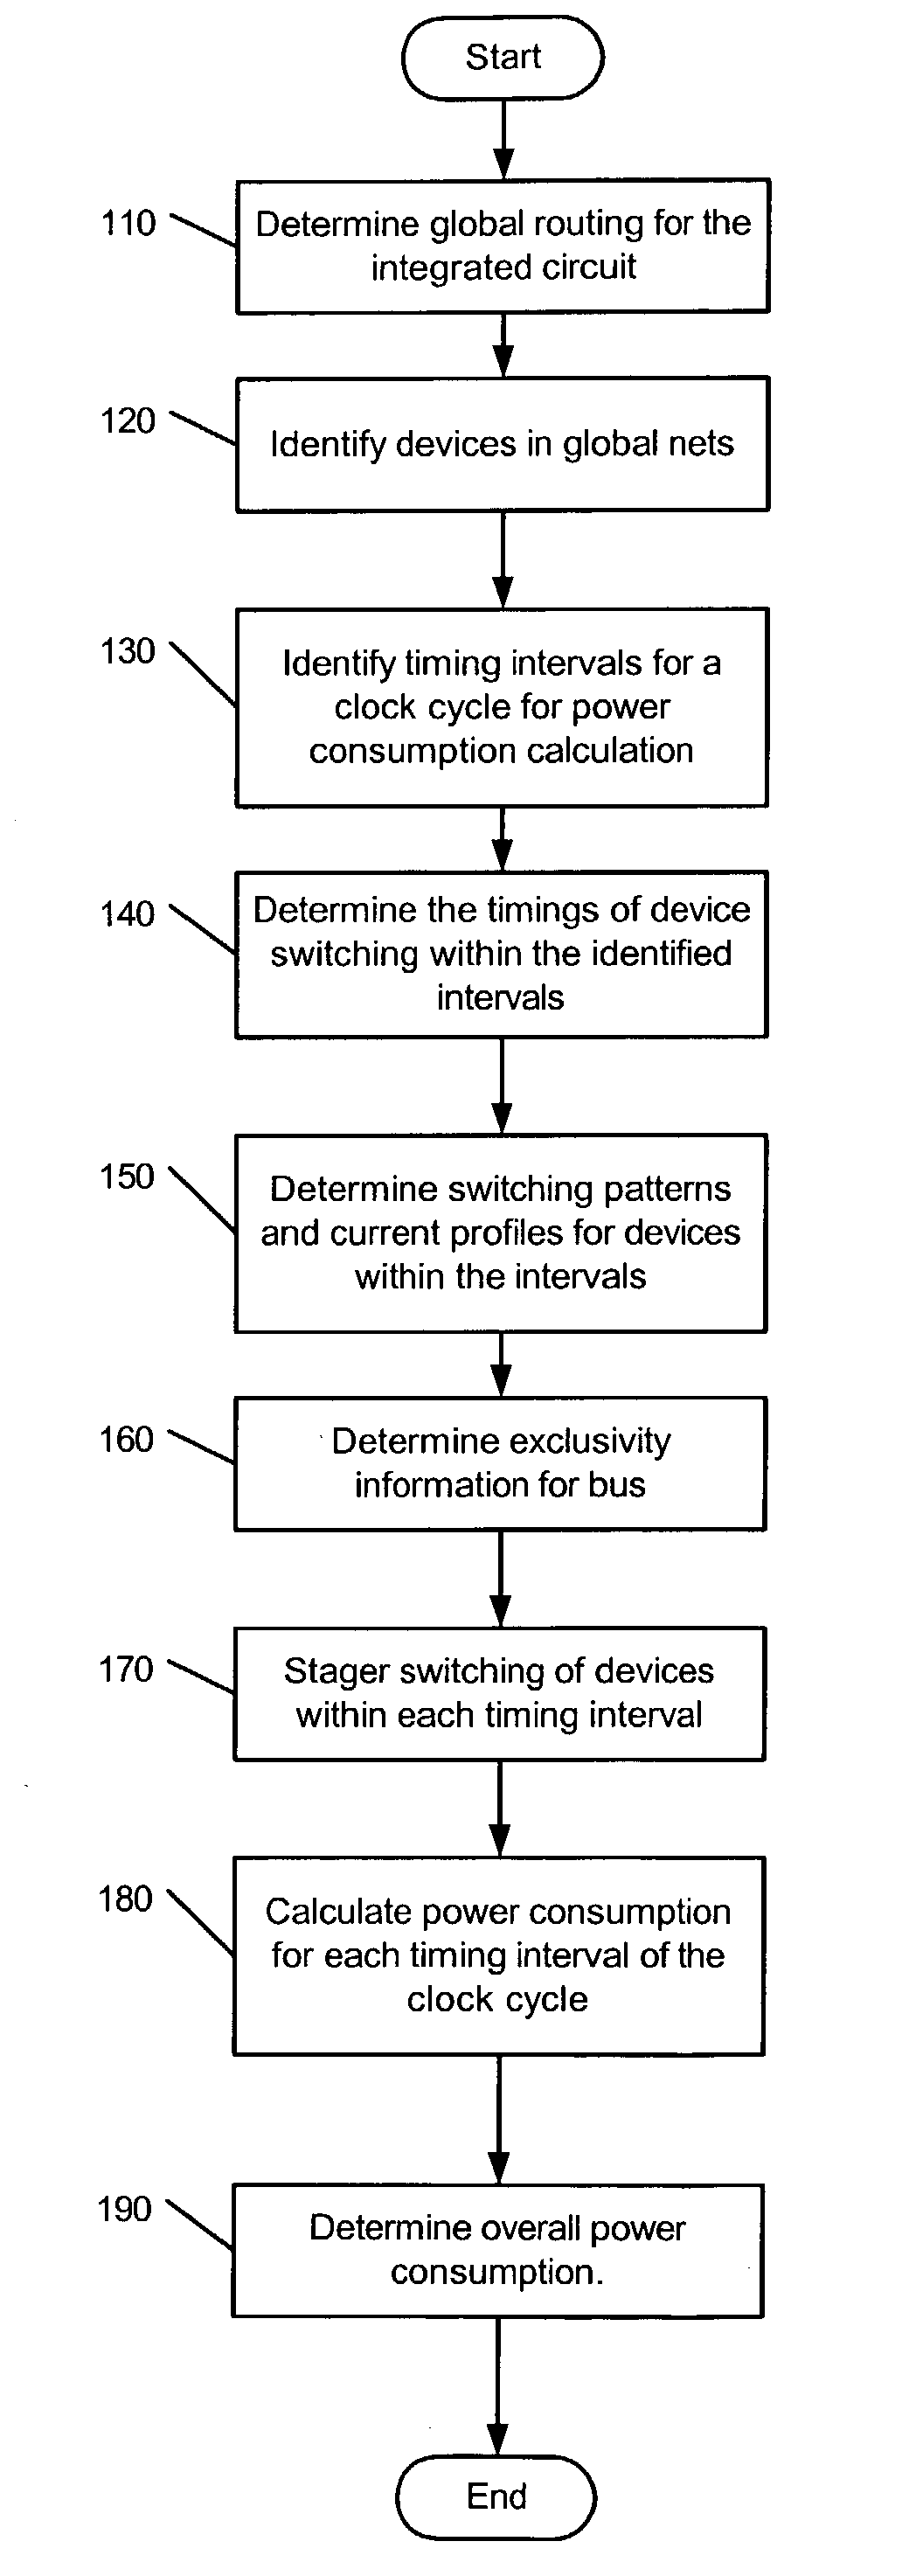 Method and apparatus for power consumption analysis in global nets